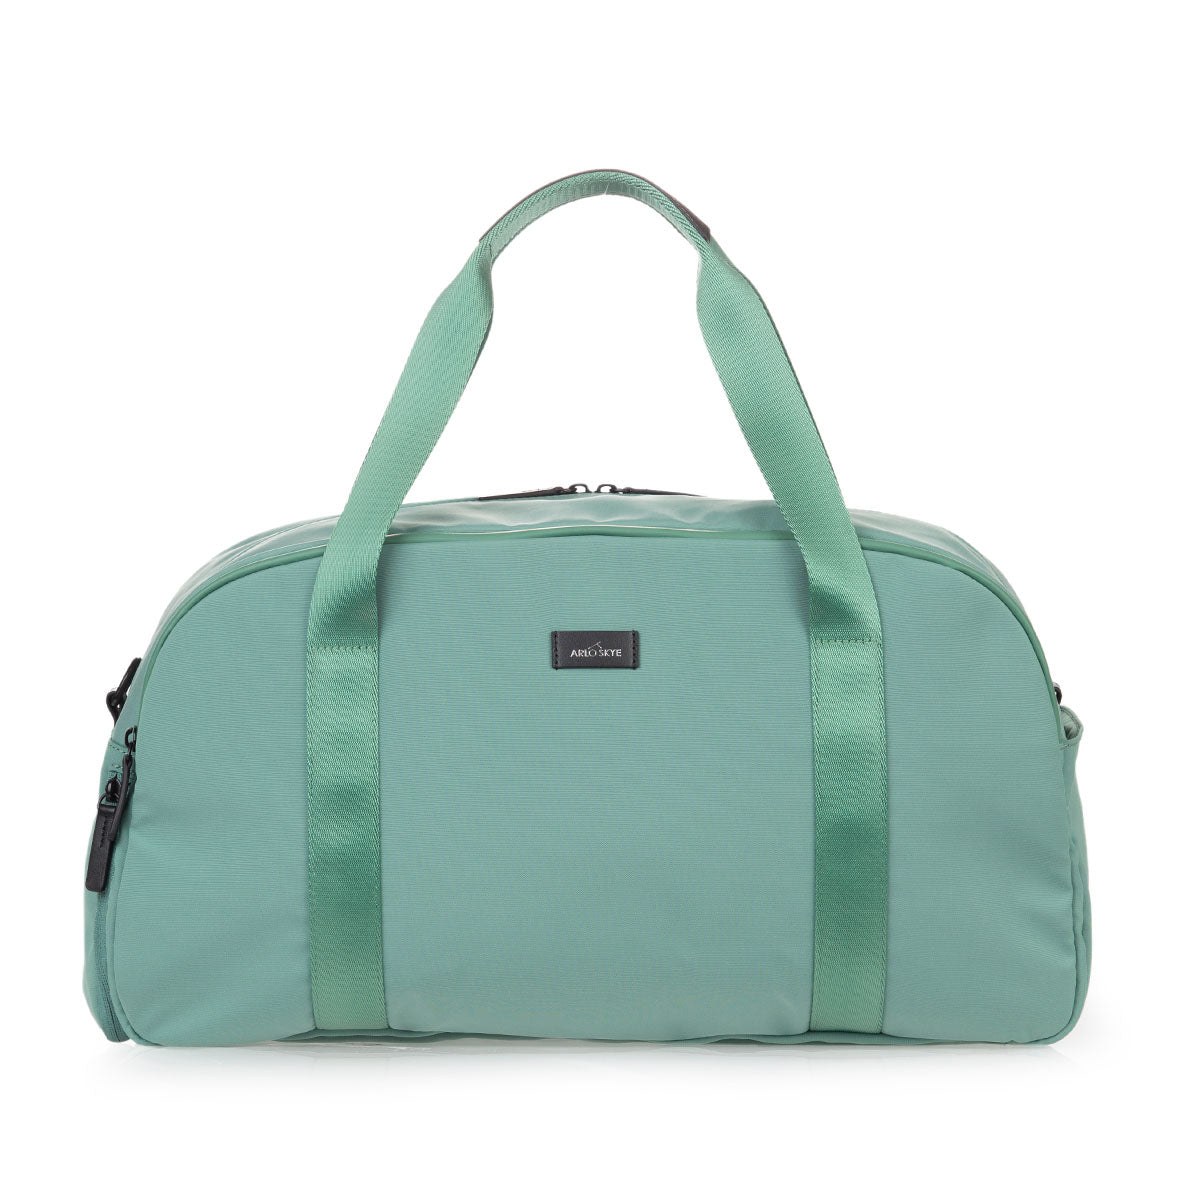 weekender in mint - front view